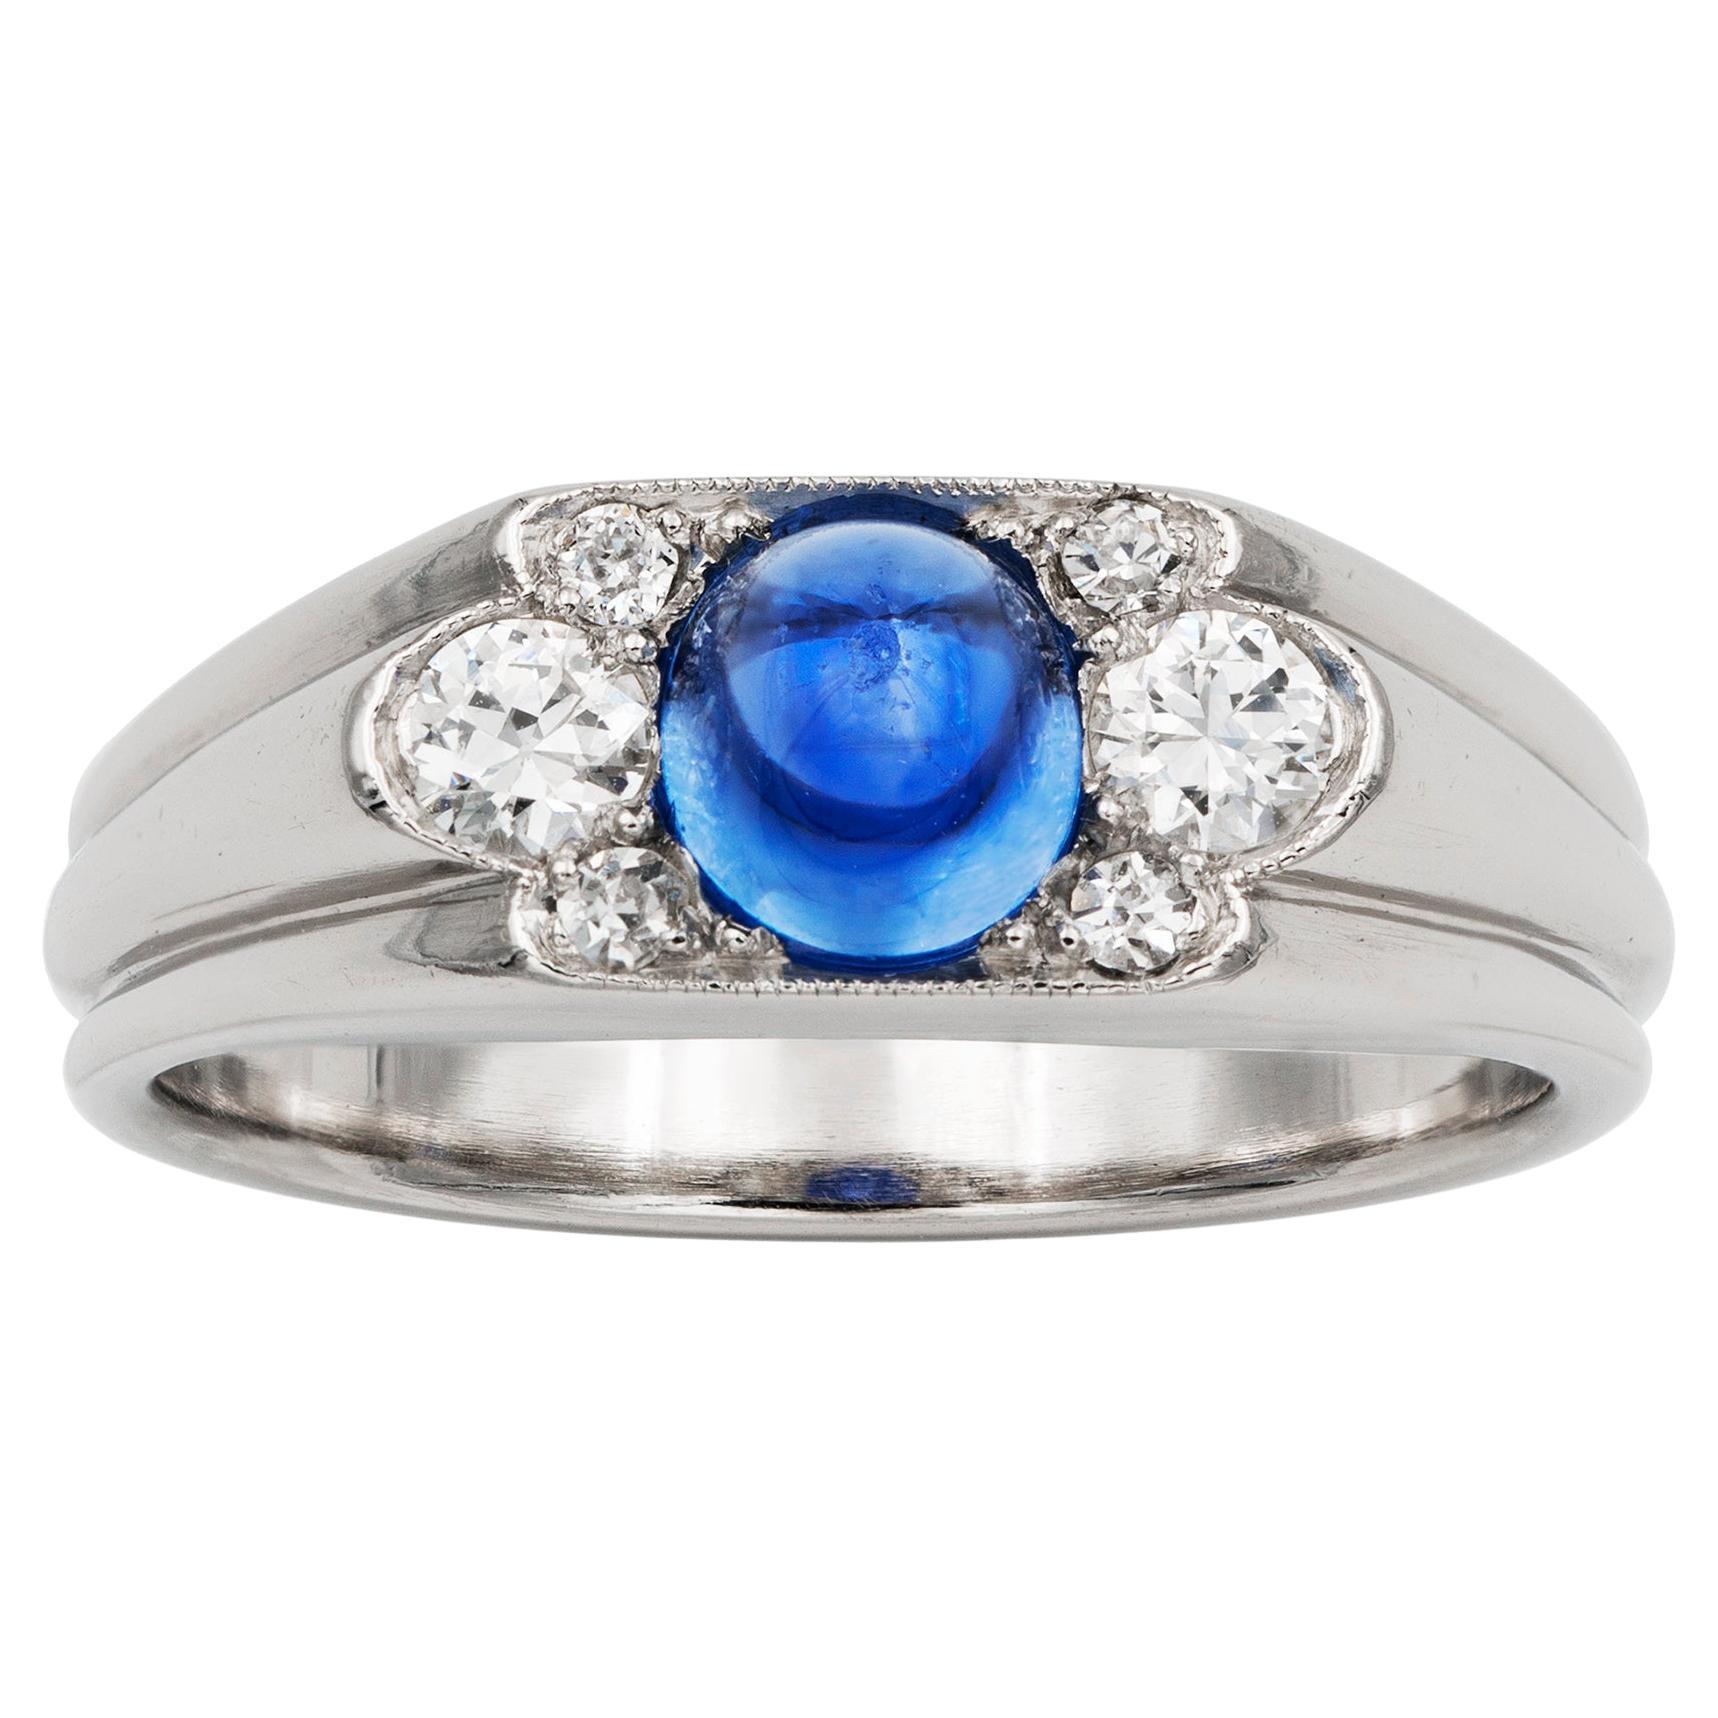 An Art Deco Sapphire And Diamond Ring For Sale